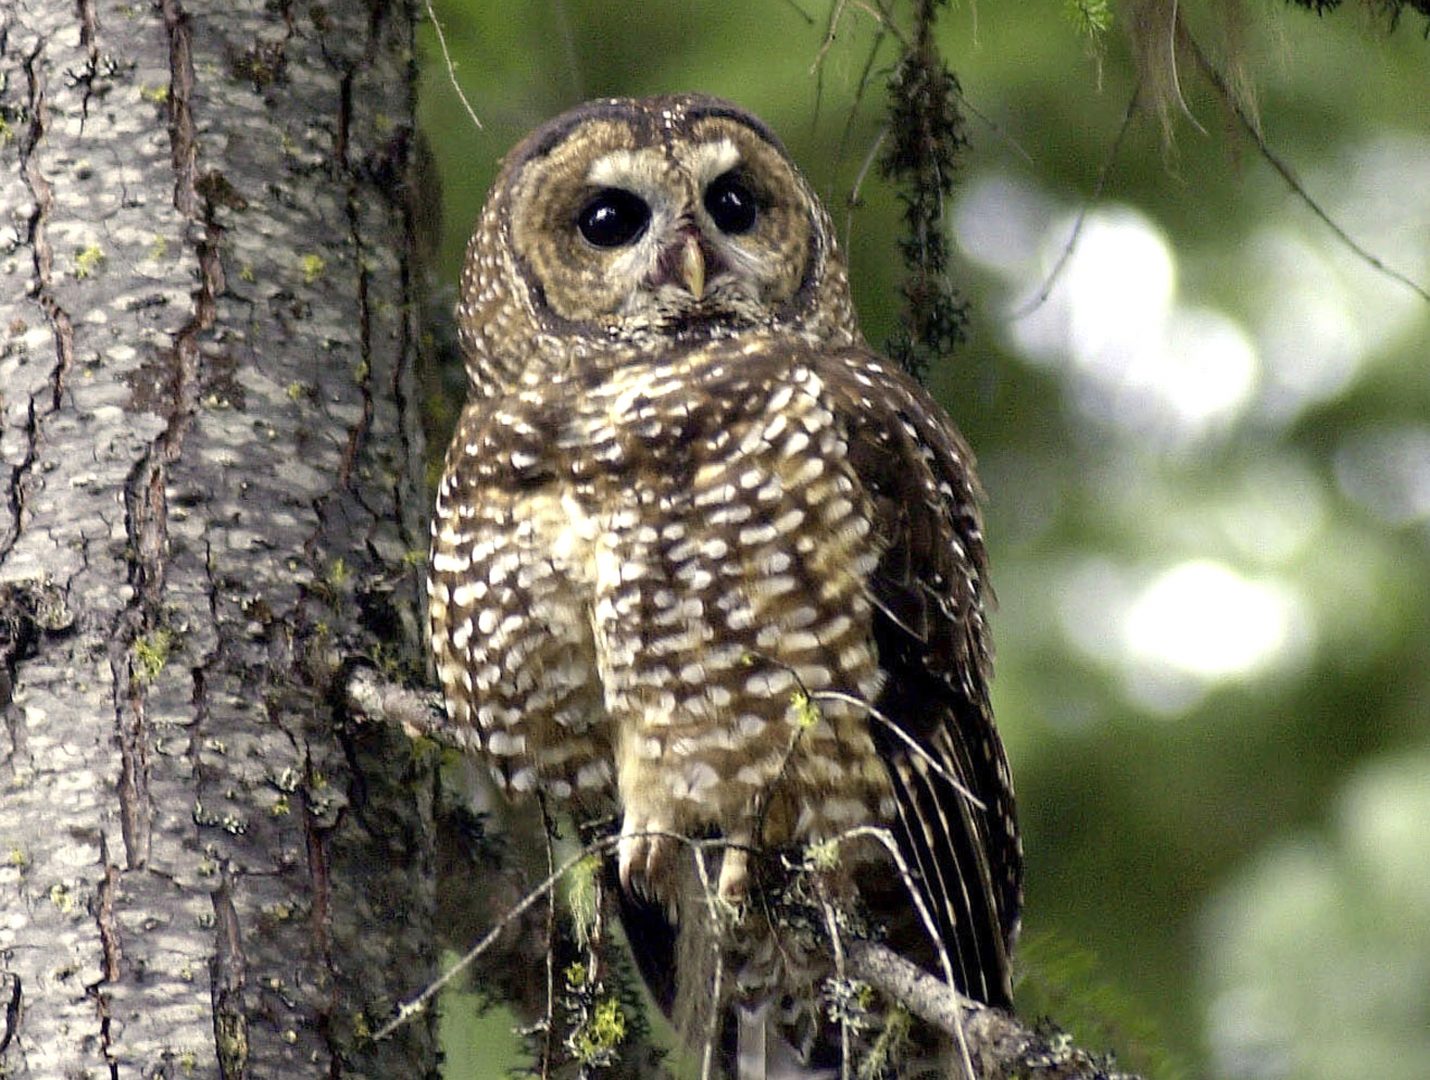 FILE PHOTO: In this May 8, 2003, file photo, a northern spotted owl sits on a tree branch in the Deschutes National Forest near Camp Sherman, Ore. A federal appeals court in San Francisco has upheld a plan by wildlife officials to kill one type of owl to study its effect on another type of owl.